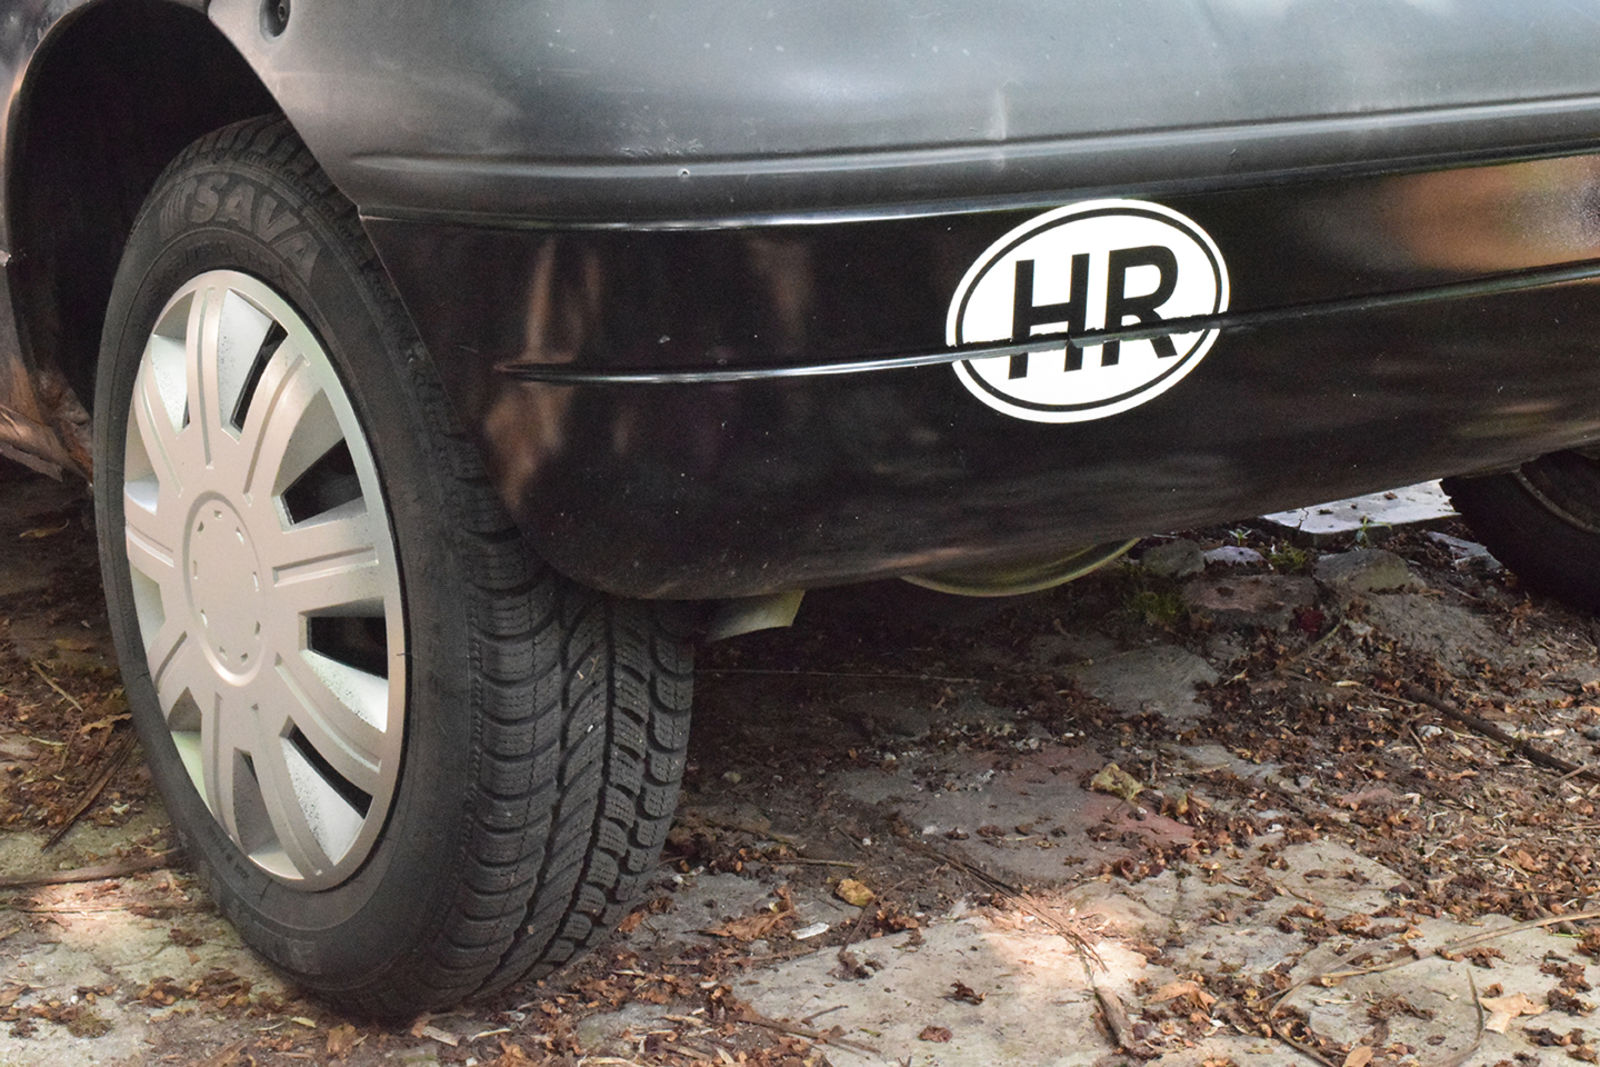 I’m removing the national tags (Croatia - Hrvatska - HR). And we gotta do something about that tiny exhaust.